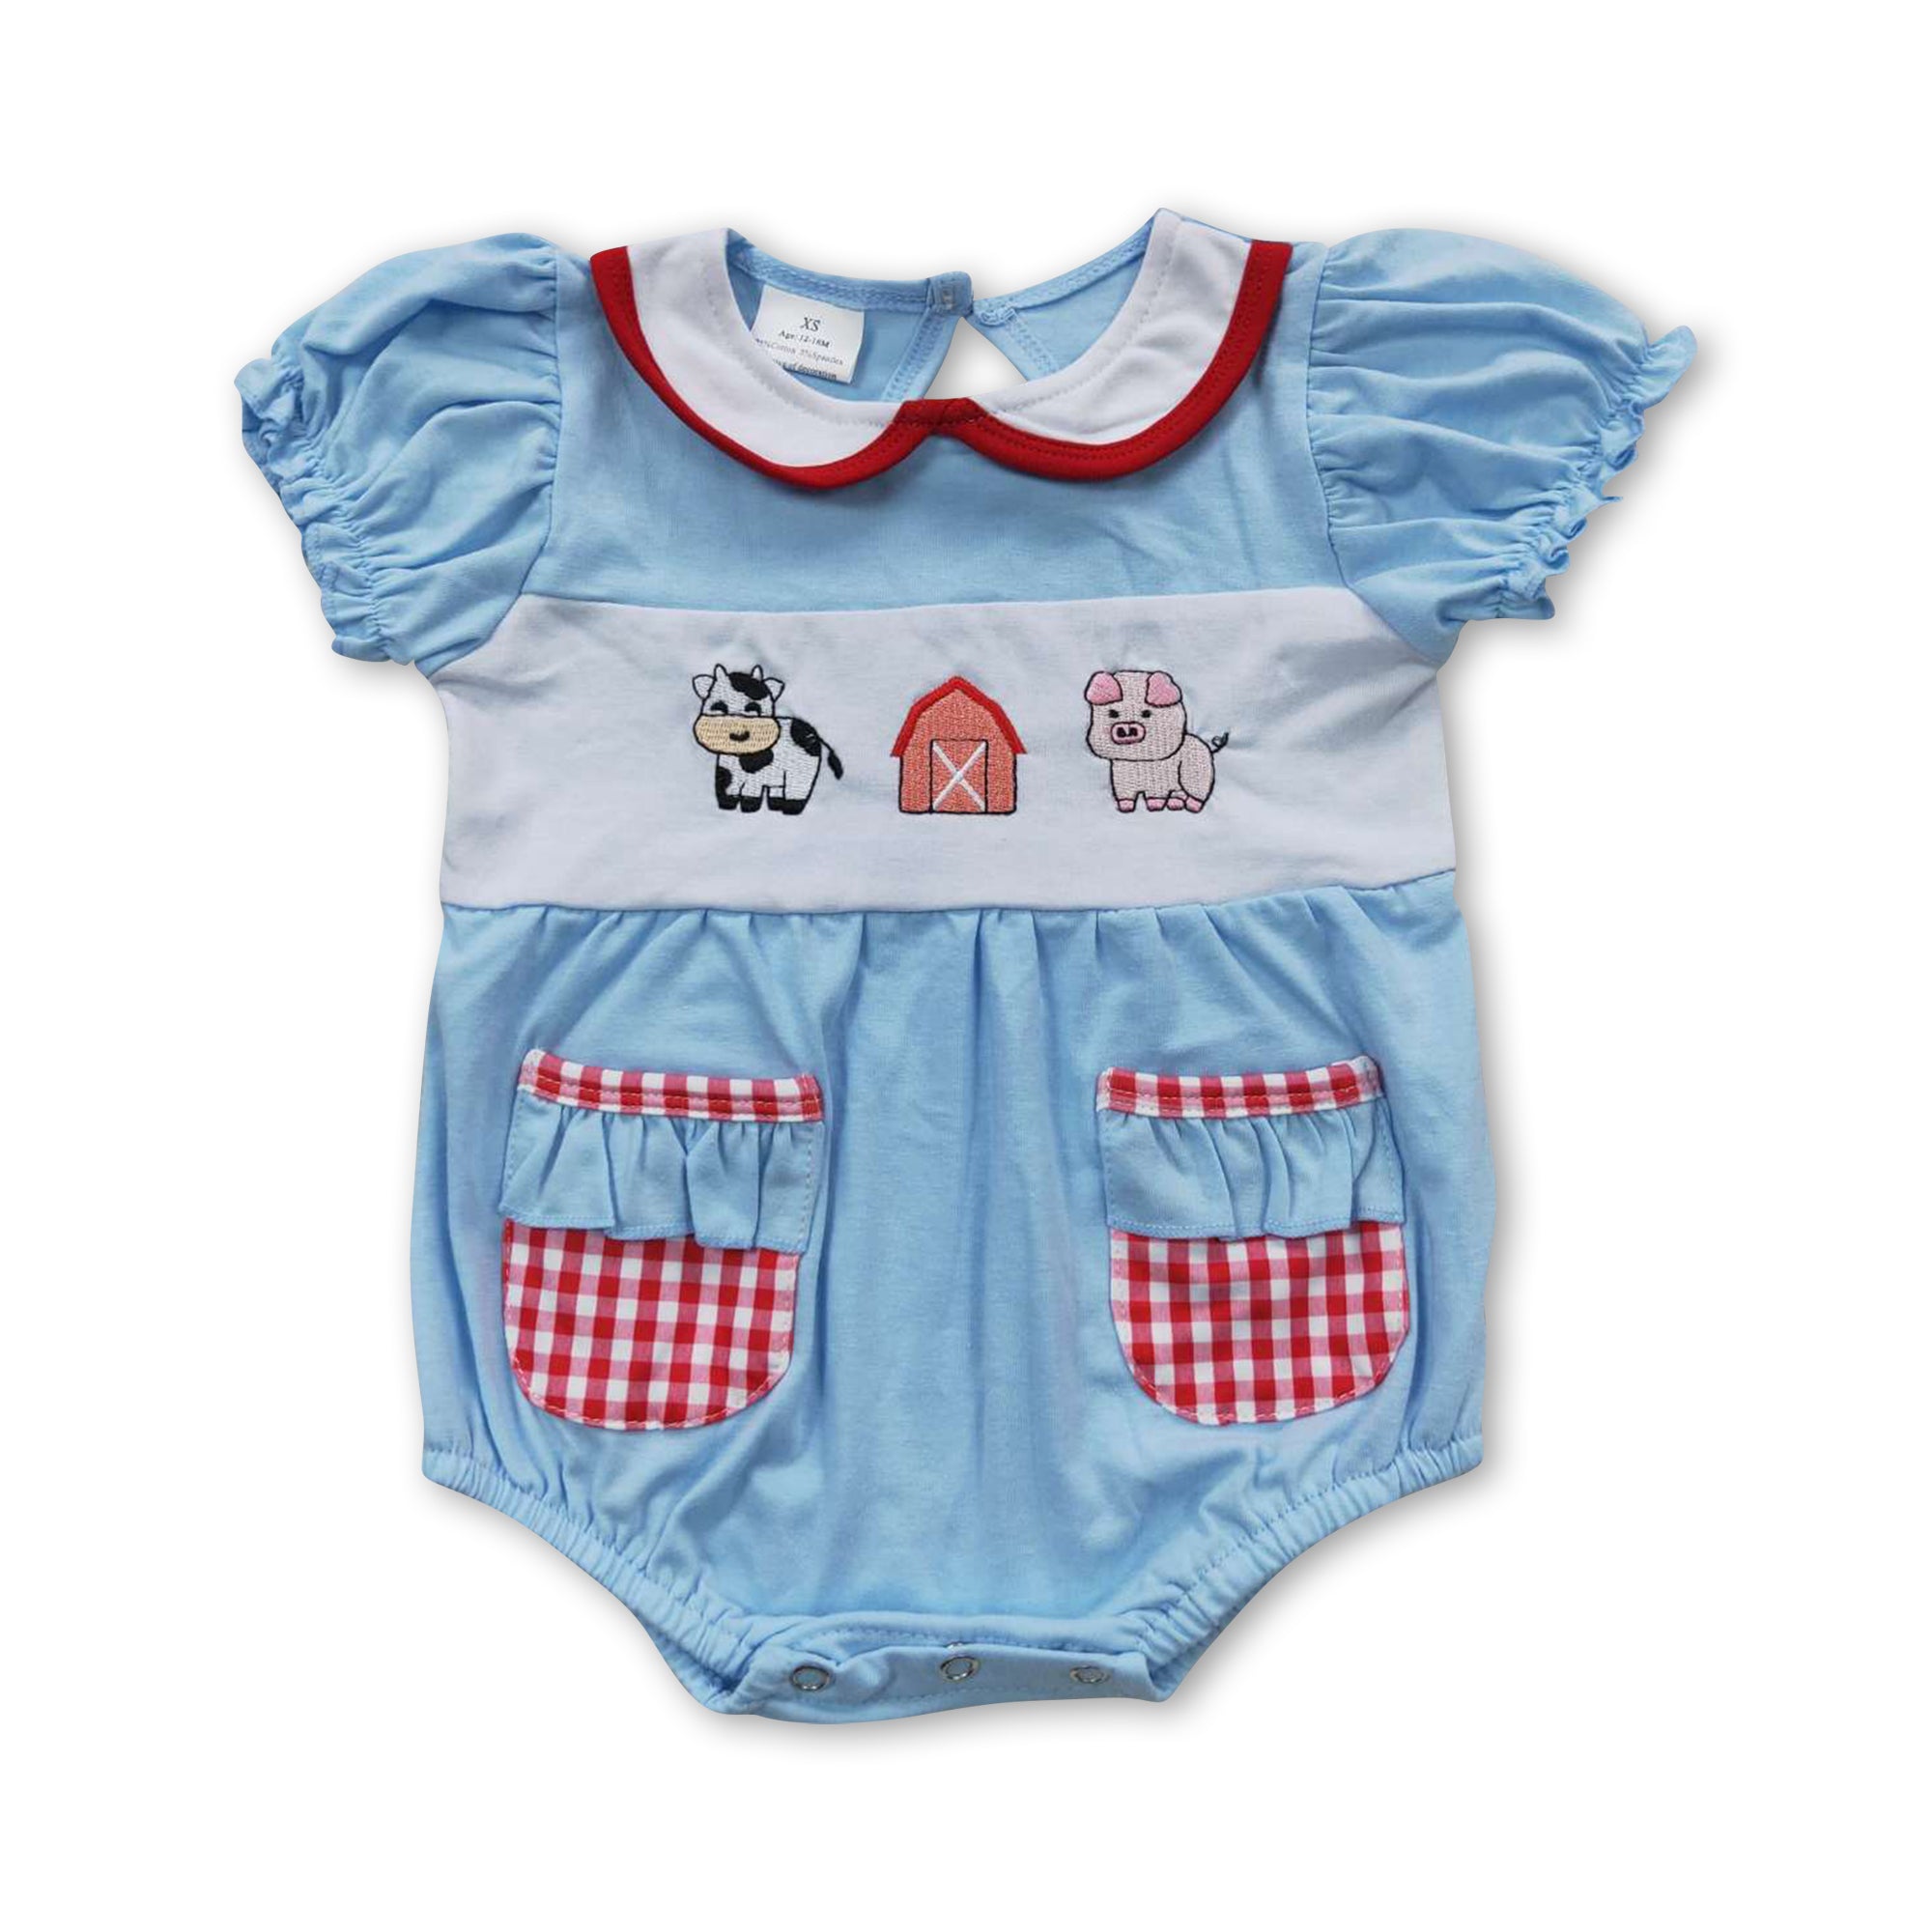 SR0263 baby girl clothes farm pig cow embroidery summer bubble